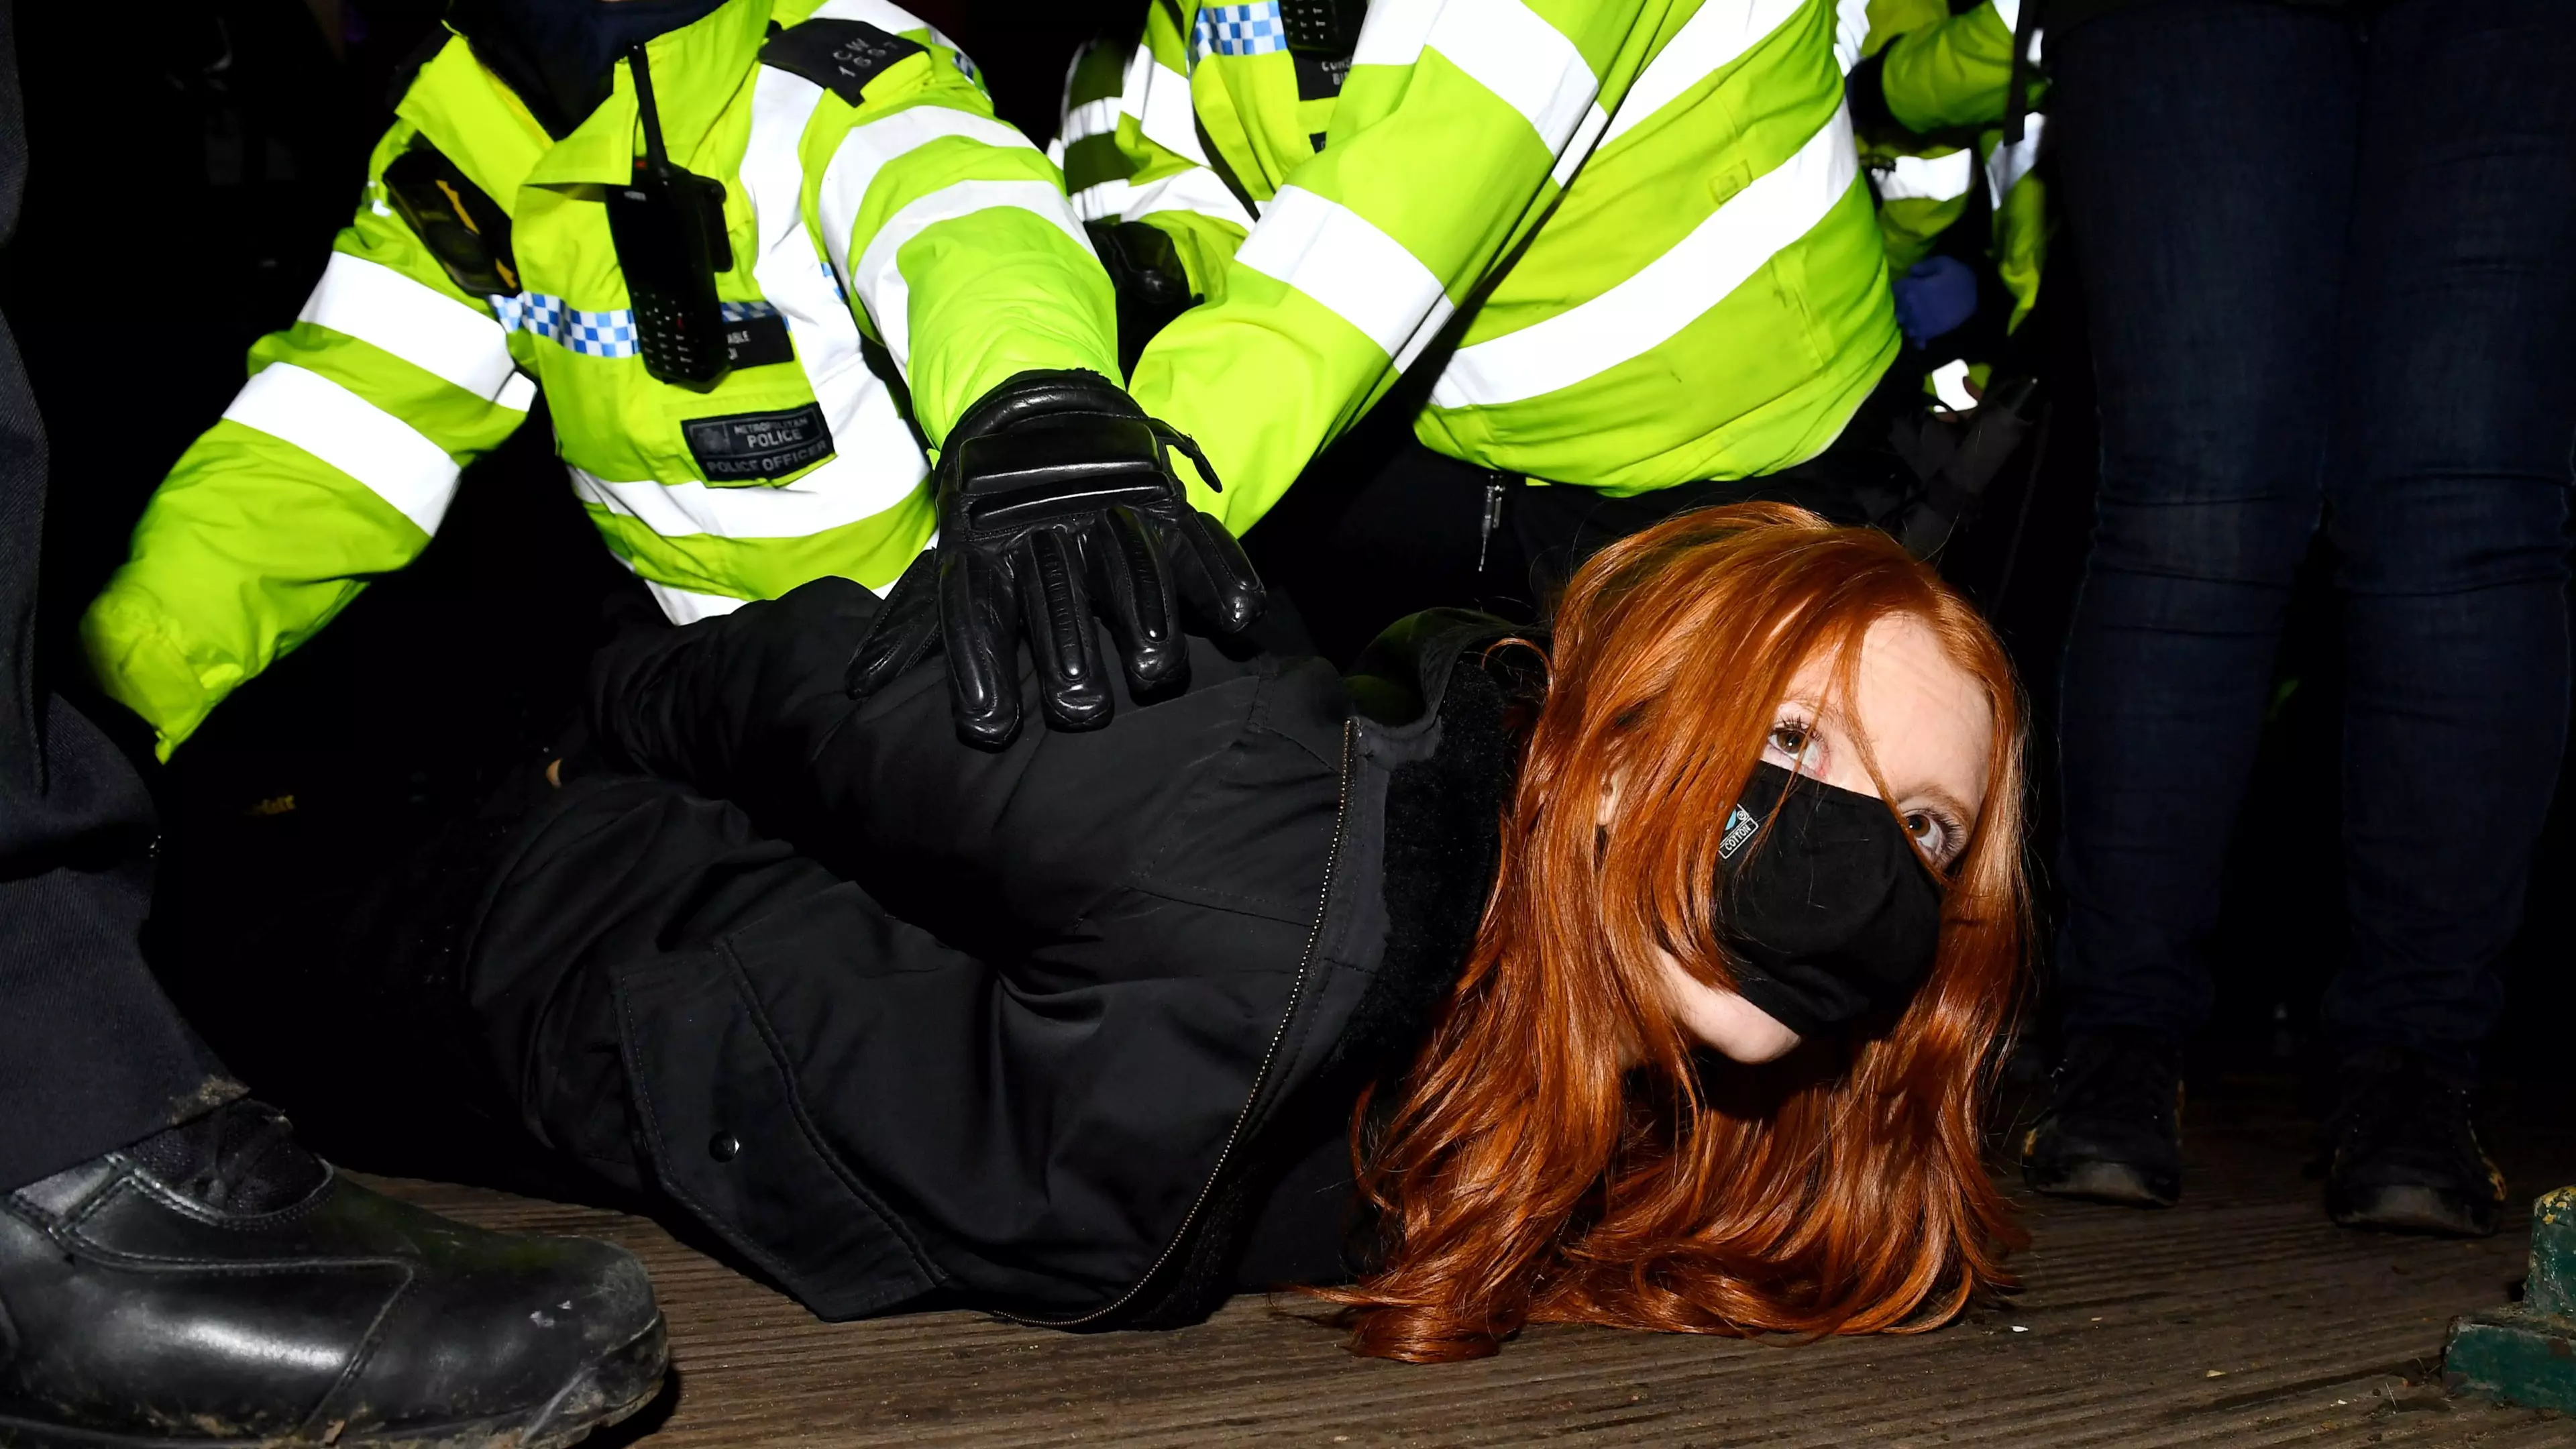 Woman Pinned Down By Police At Sarah Everard Vigil Says She Was 'Terrified' 